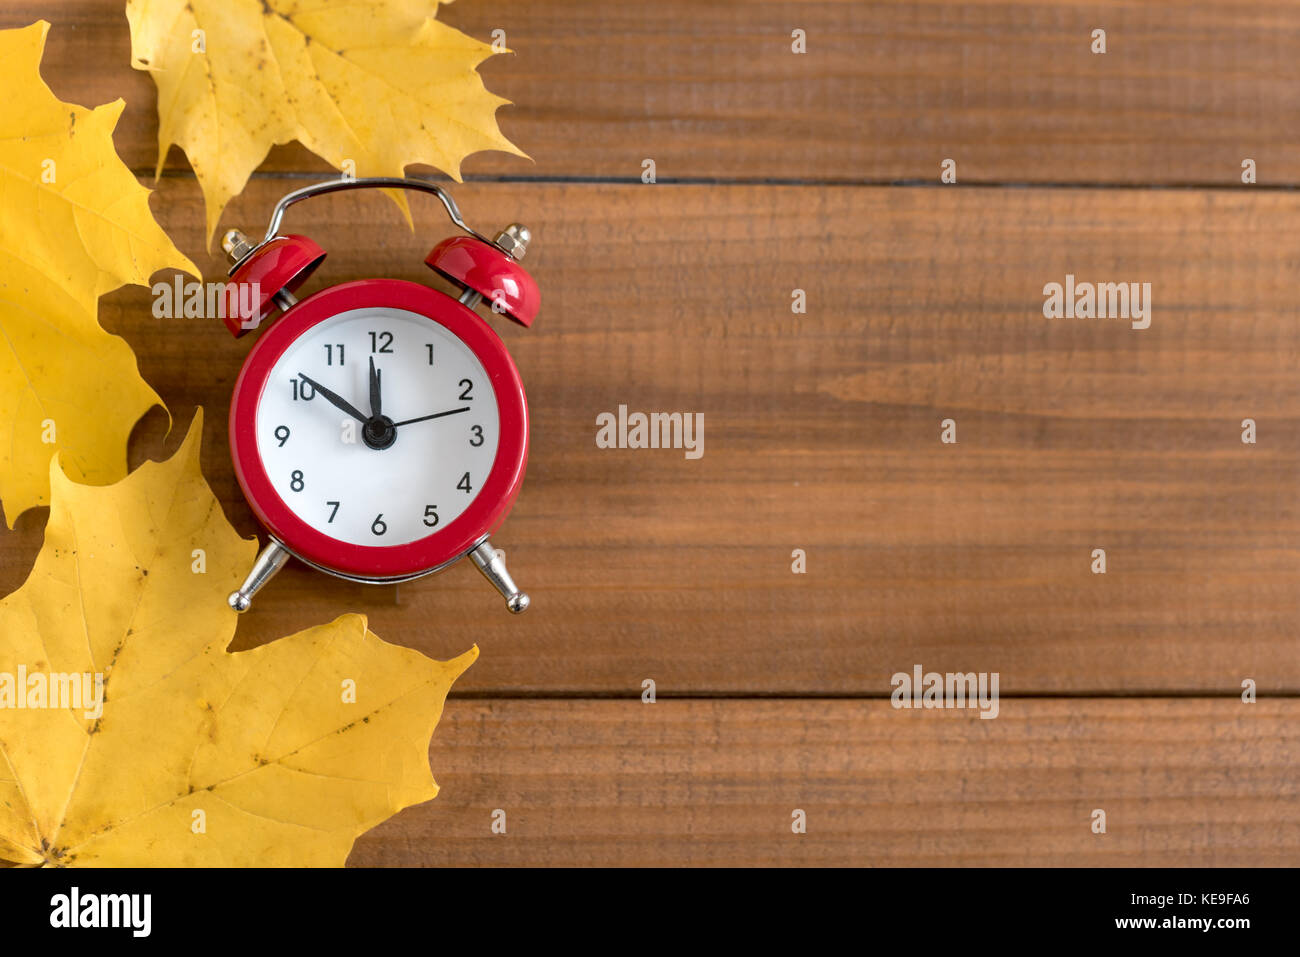 Top view of red vintage alarm clock on wooden background. Time change concept. Stock Photo